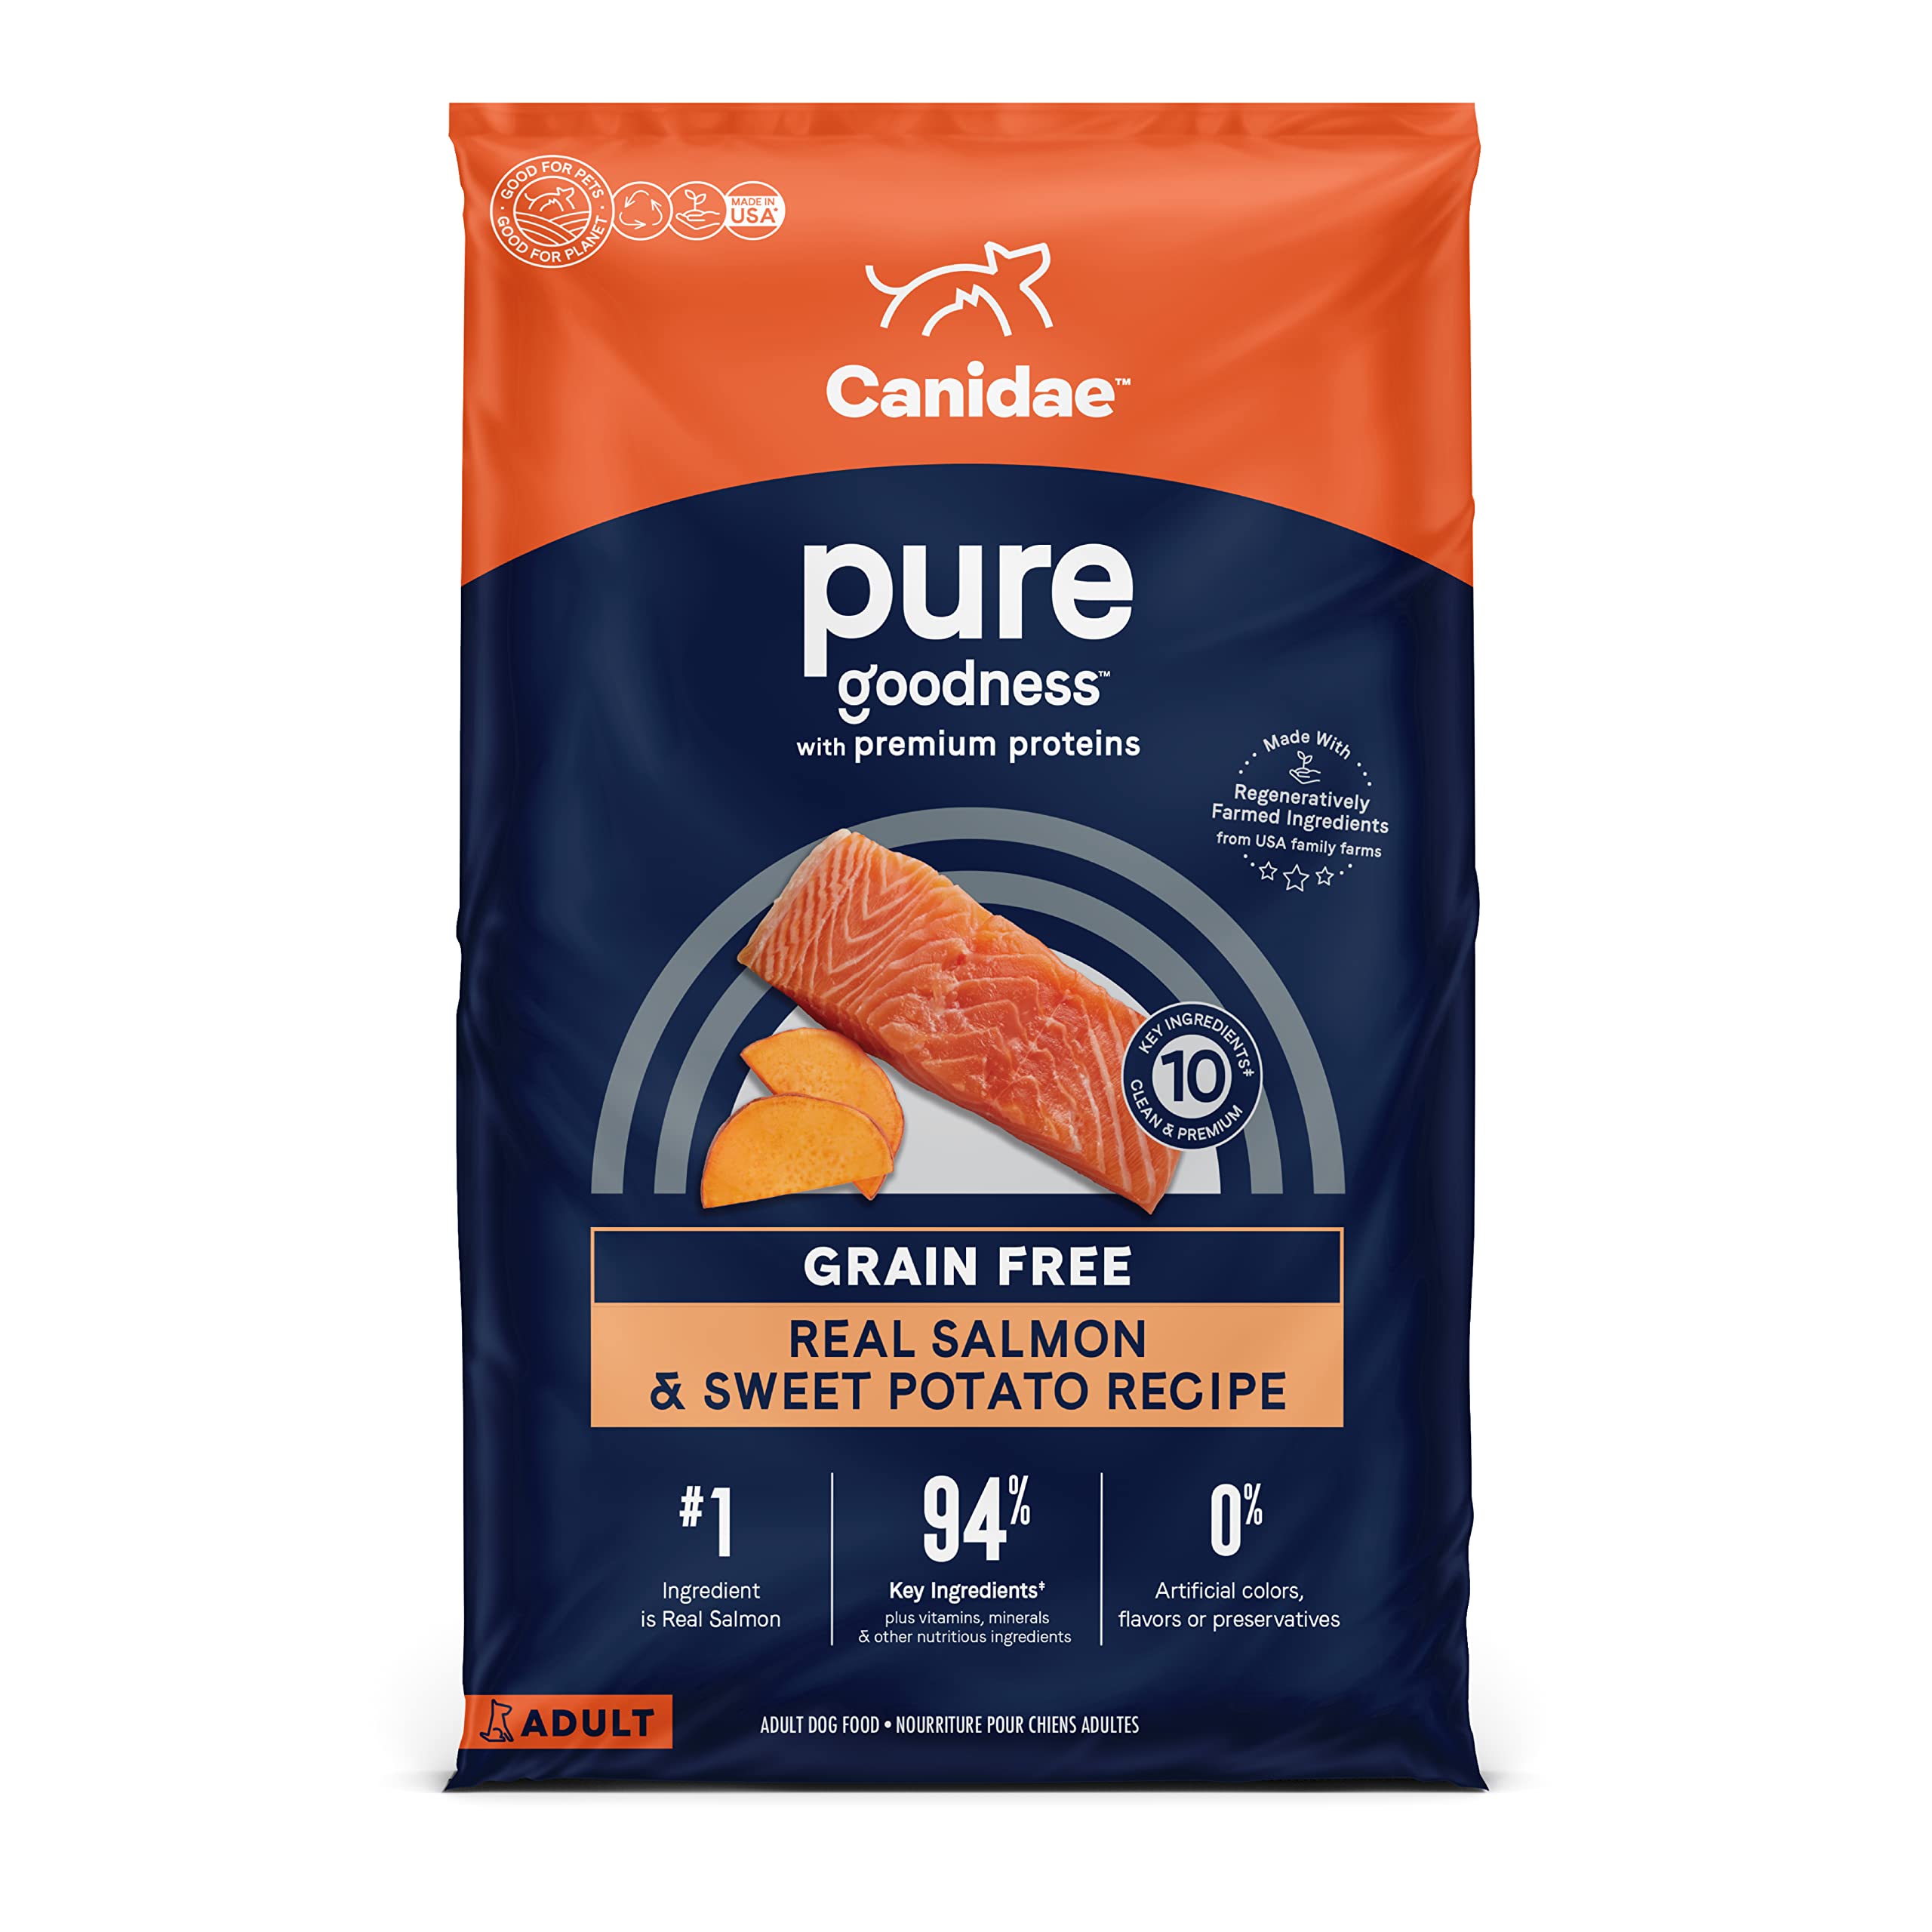 22-Lbs Canidae Pure Limited Ingredient Premium Adult Dry Dog Food (Real Salmon & Sweet Potato Recipe, Grain Free) $41.25 + Free Shipping